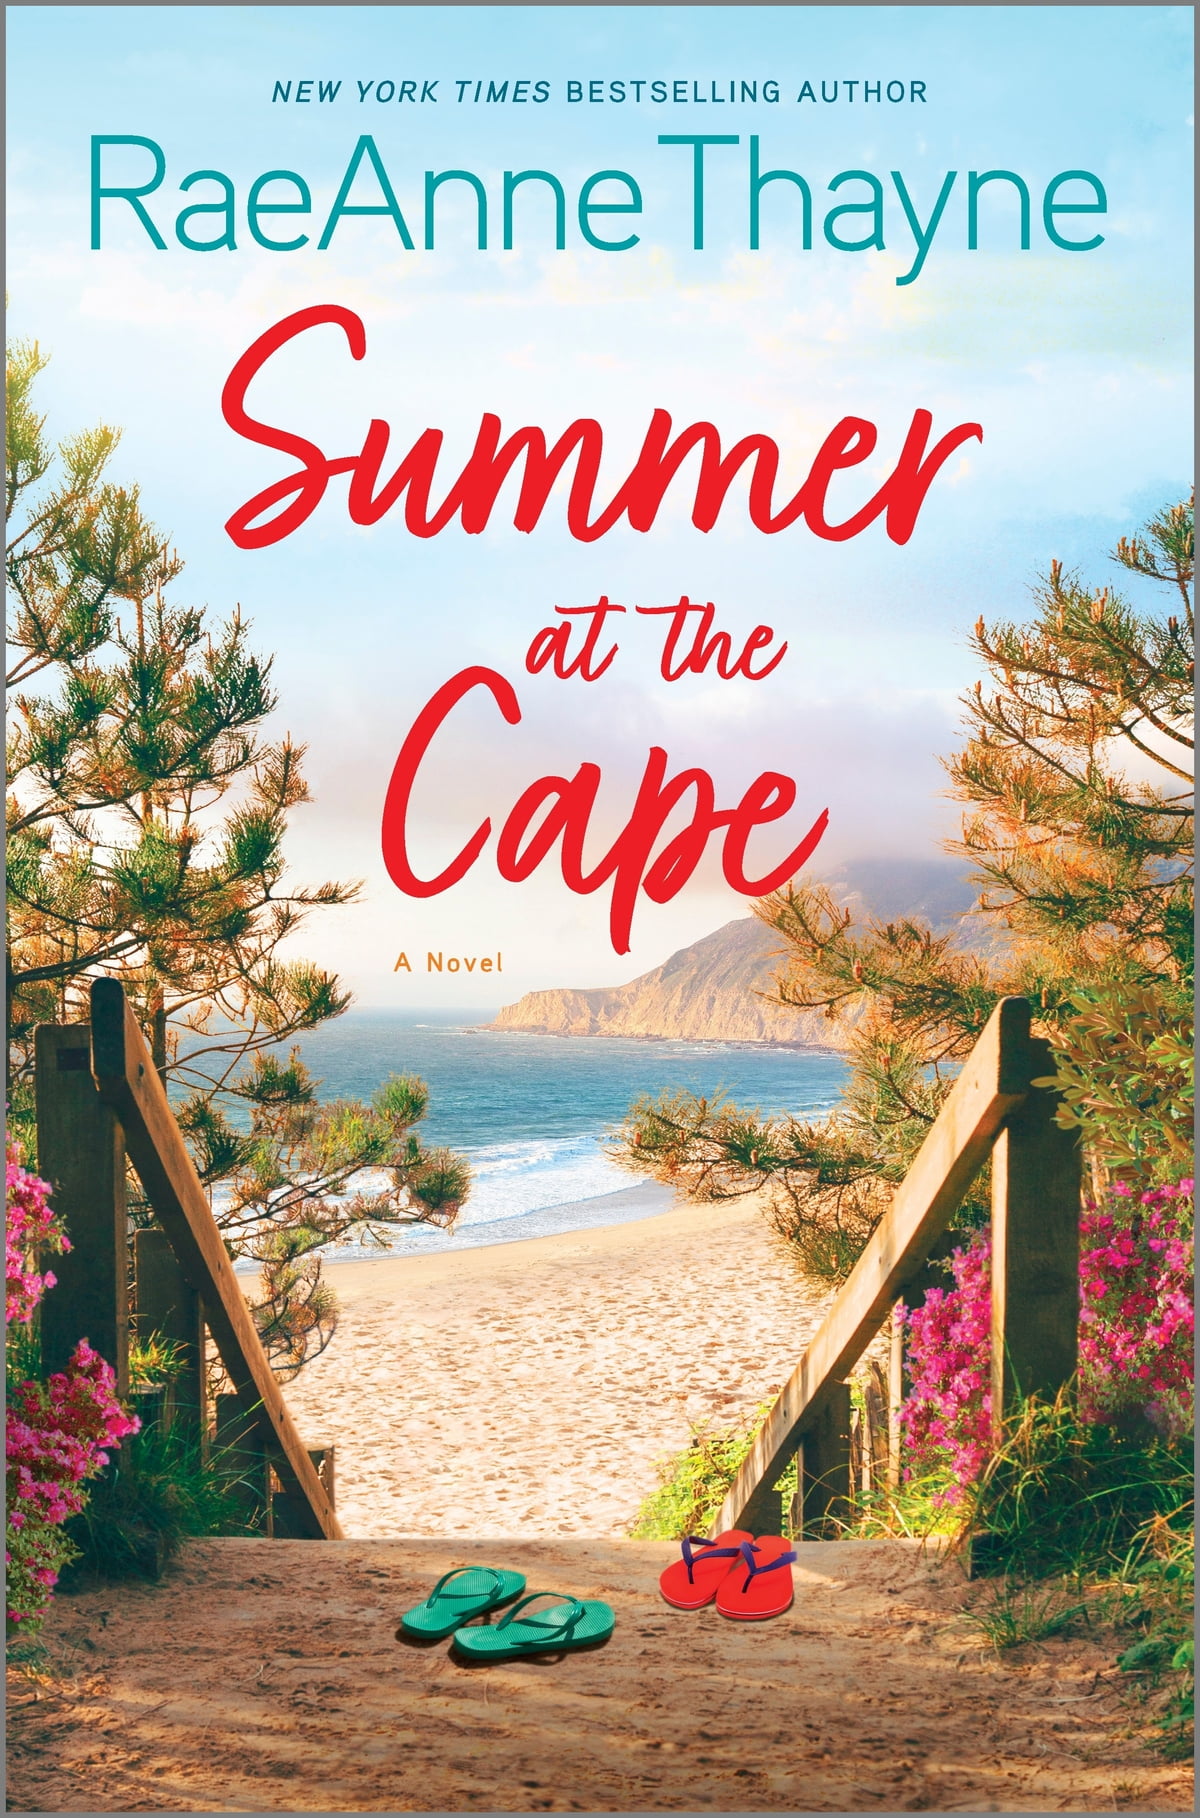 Summer at the Cape by RaeAnne Thayne ePub Download